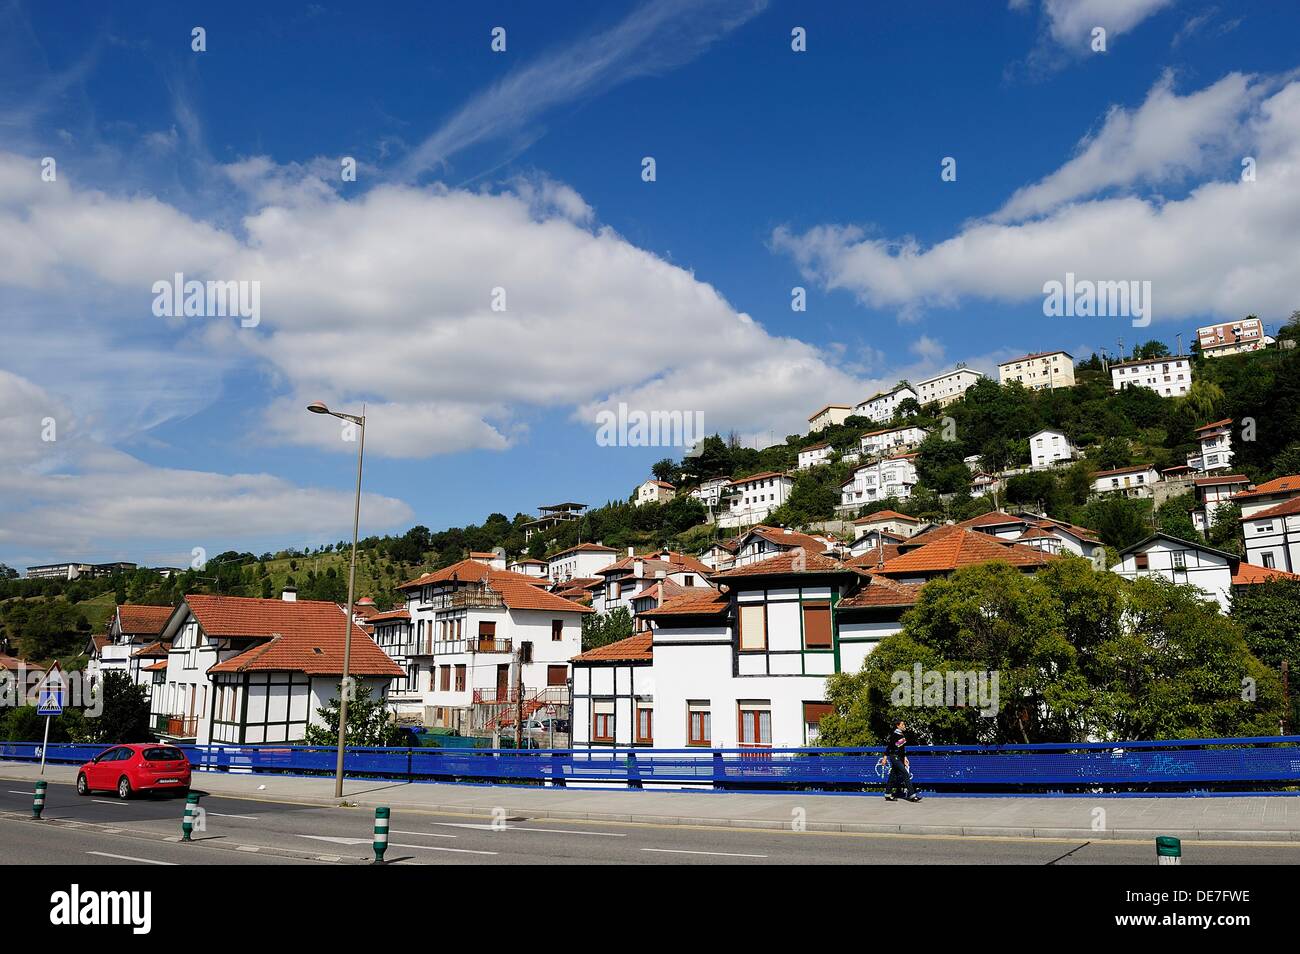 Garden City district in Bilbao, consisting of low houses was designed by architect Pedro Bilbao Ispizua Stock Photo